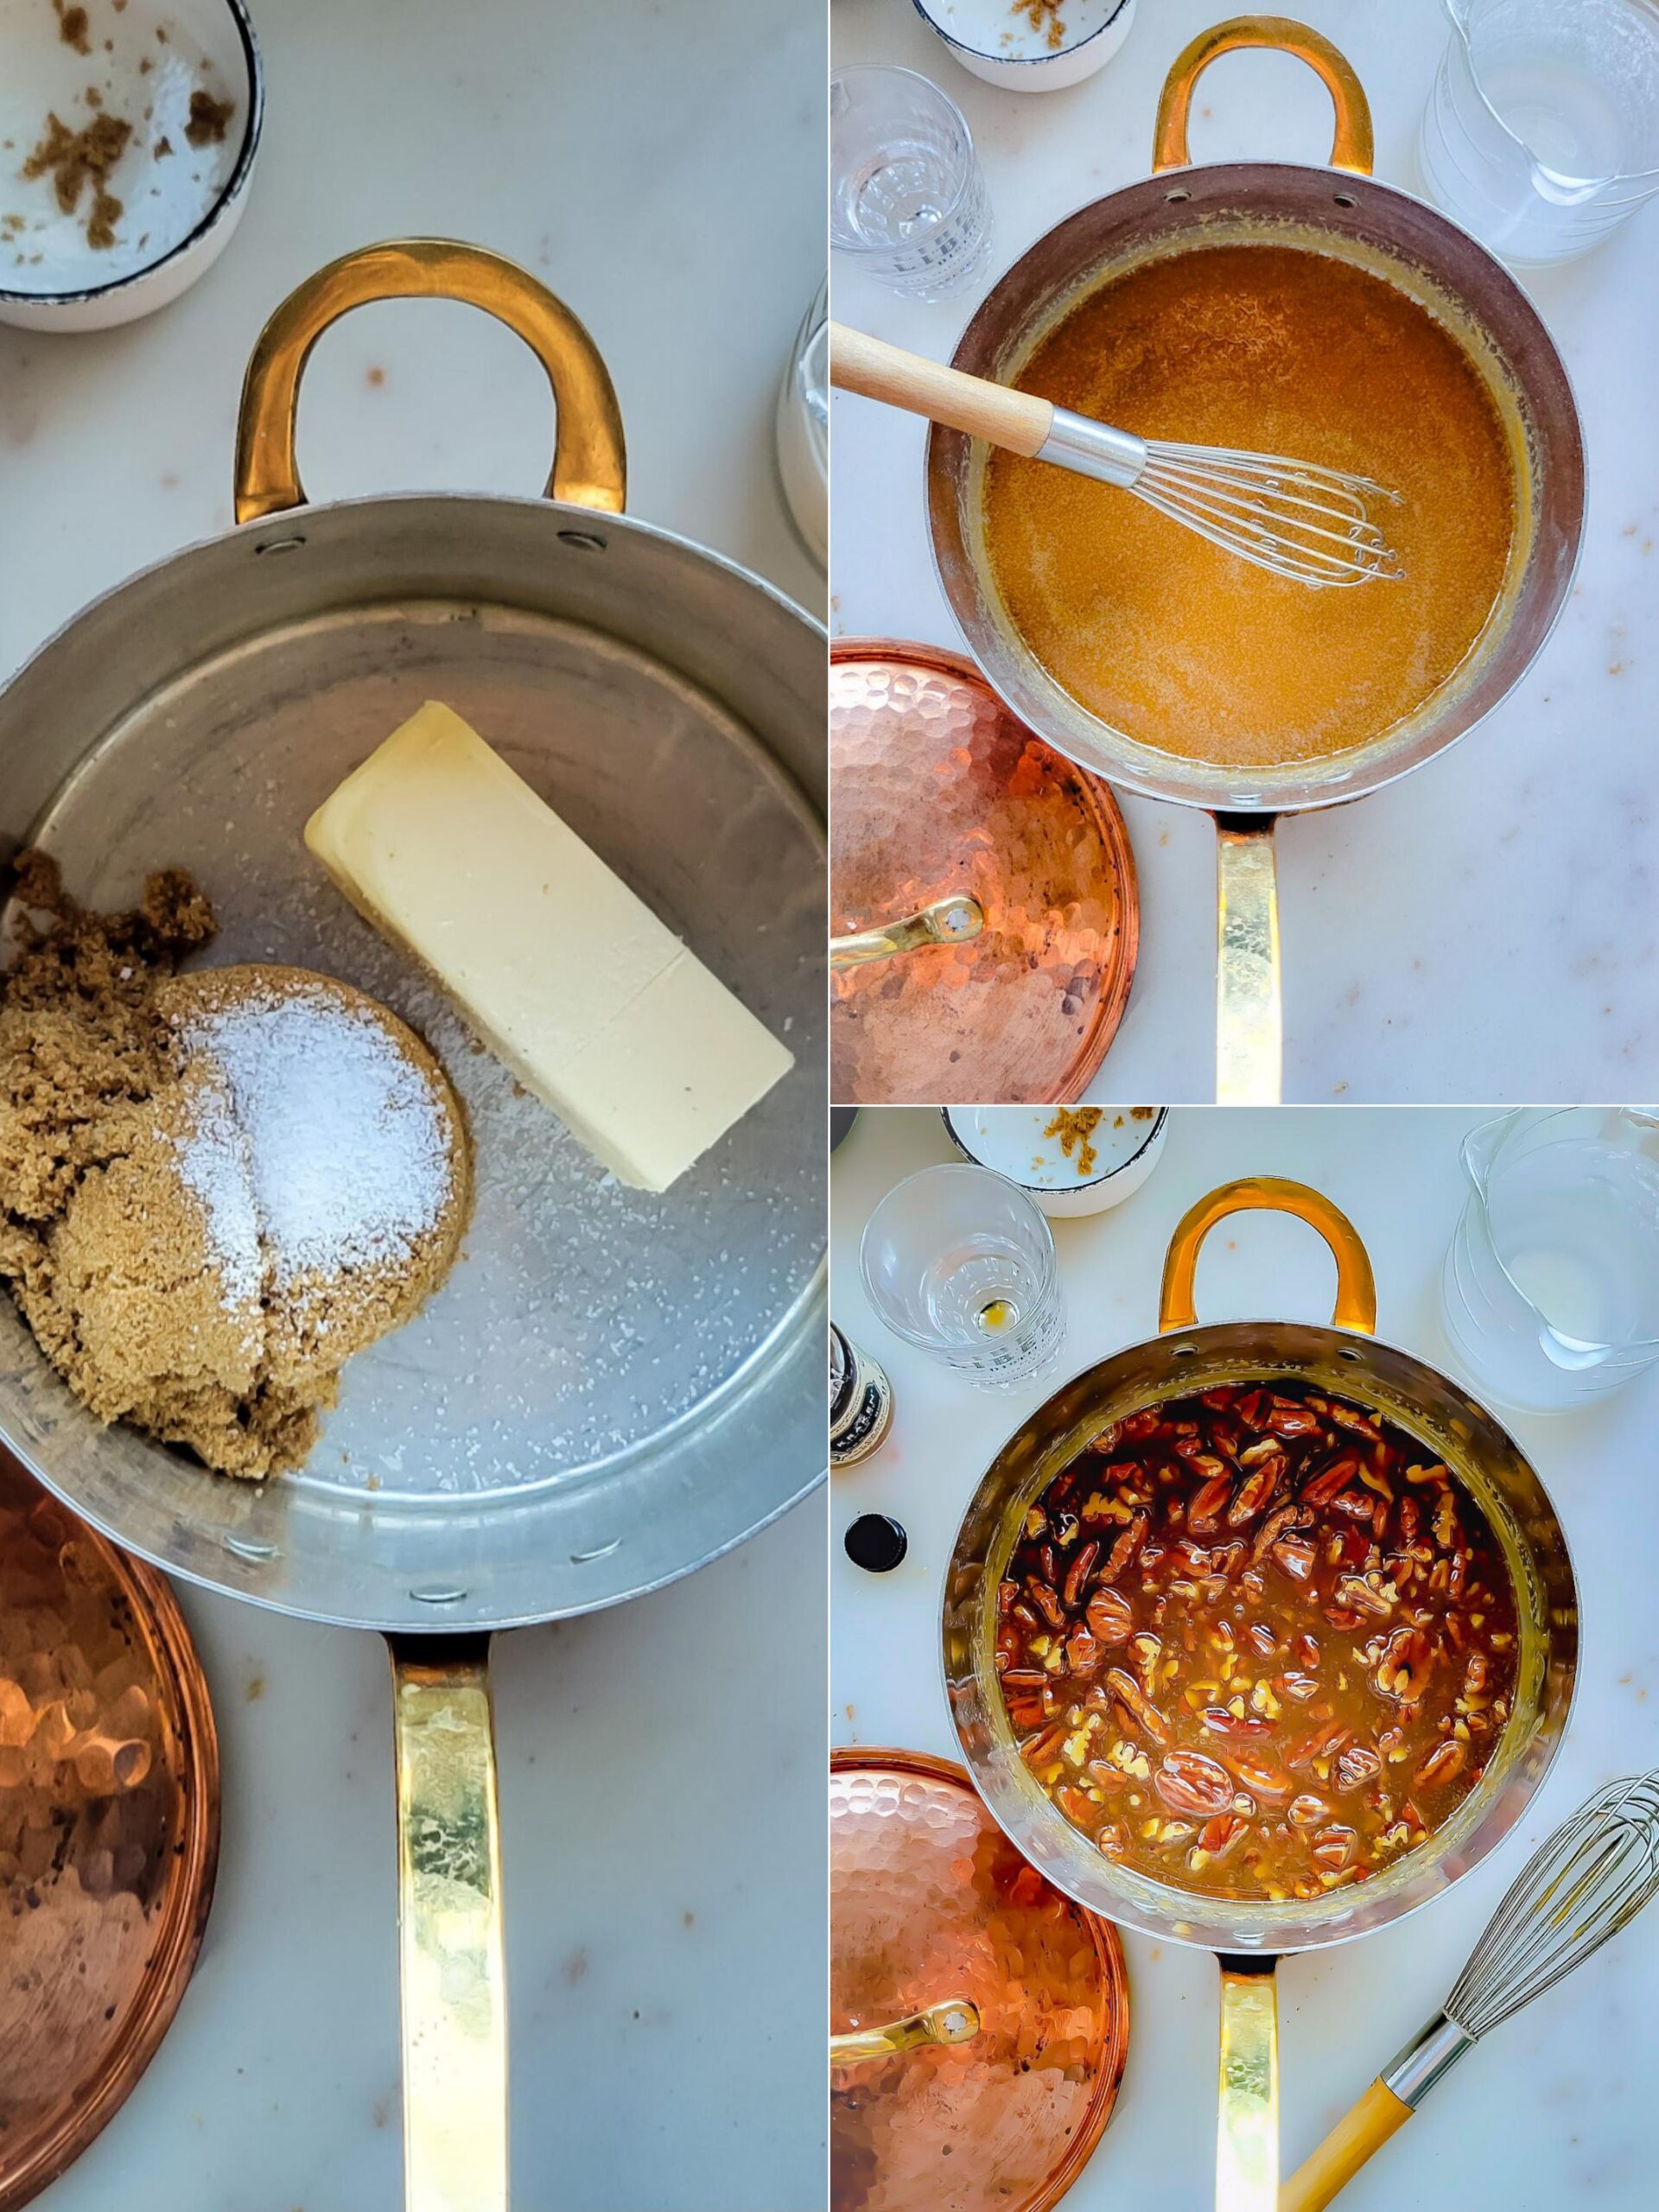 Collage showing the making of the Pecan Praline for the Pumpkin Cheesecake.